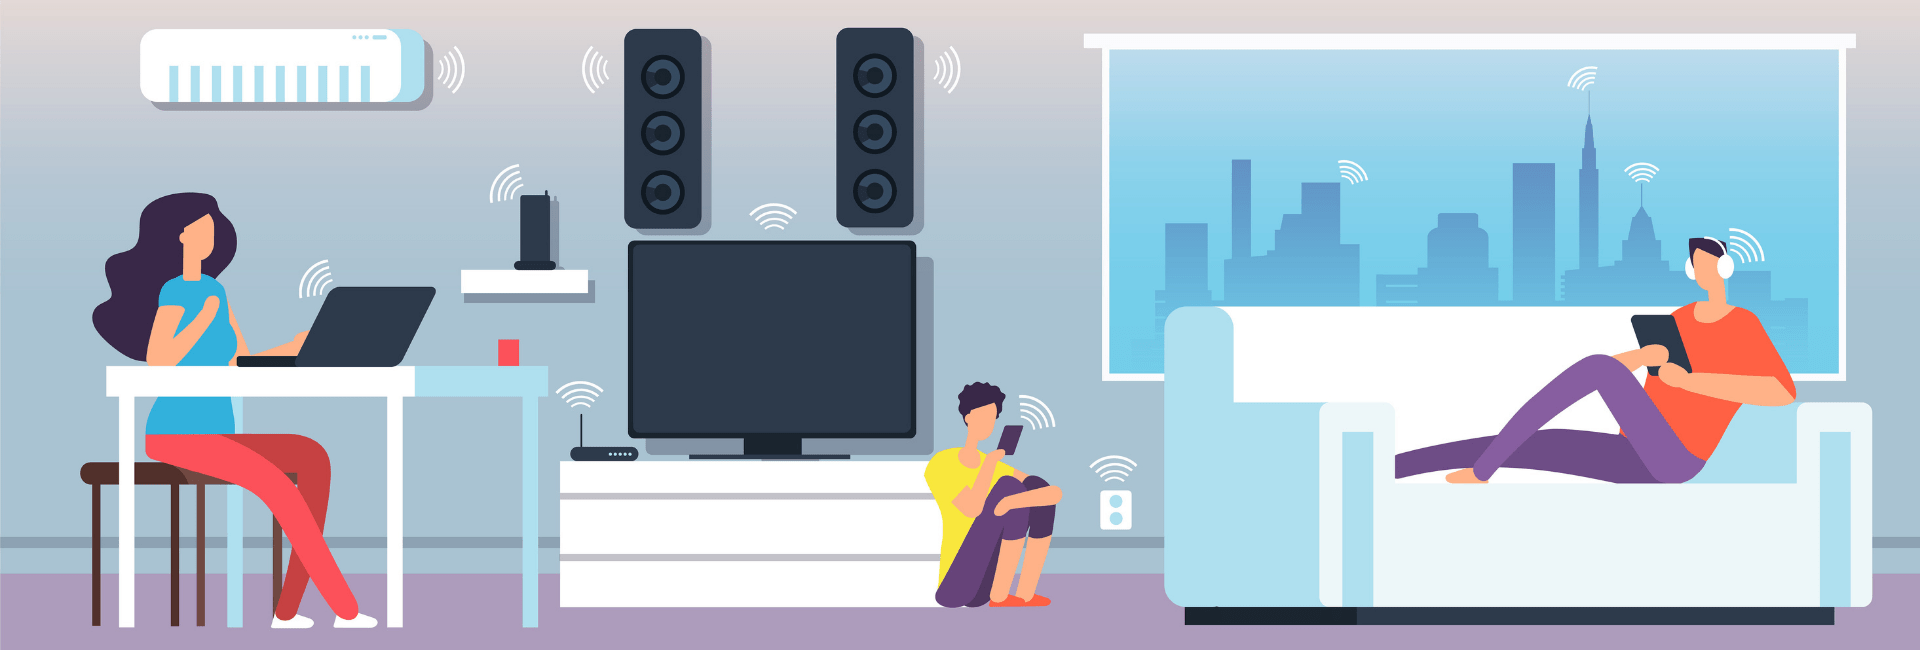 illustration of a family using connected TV devices